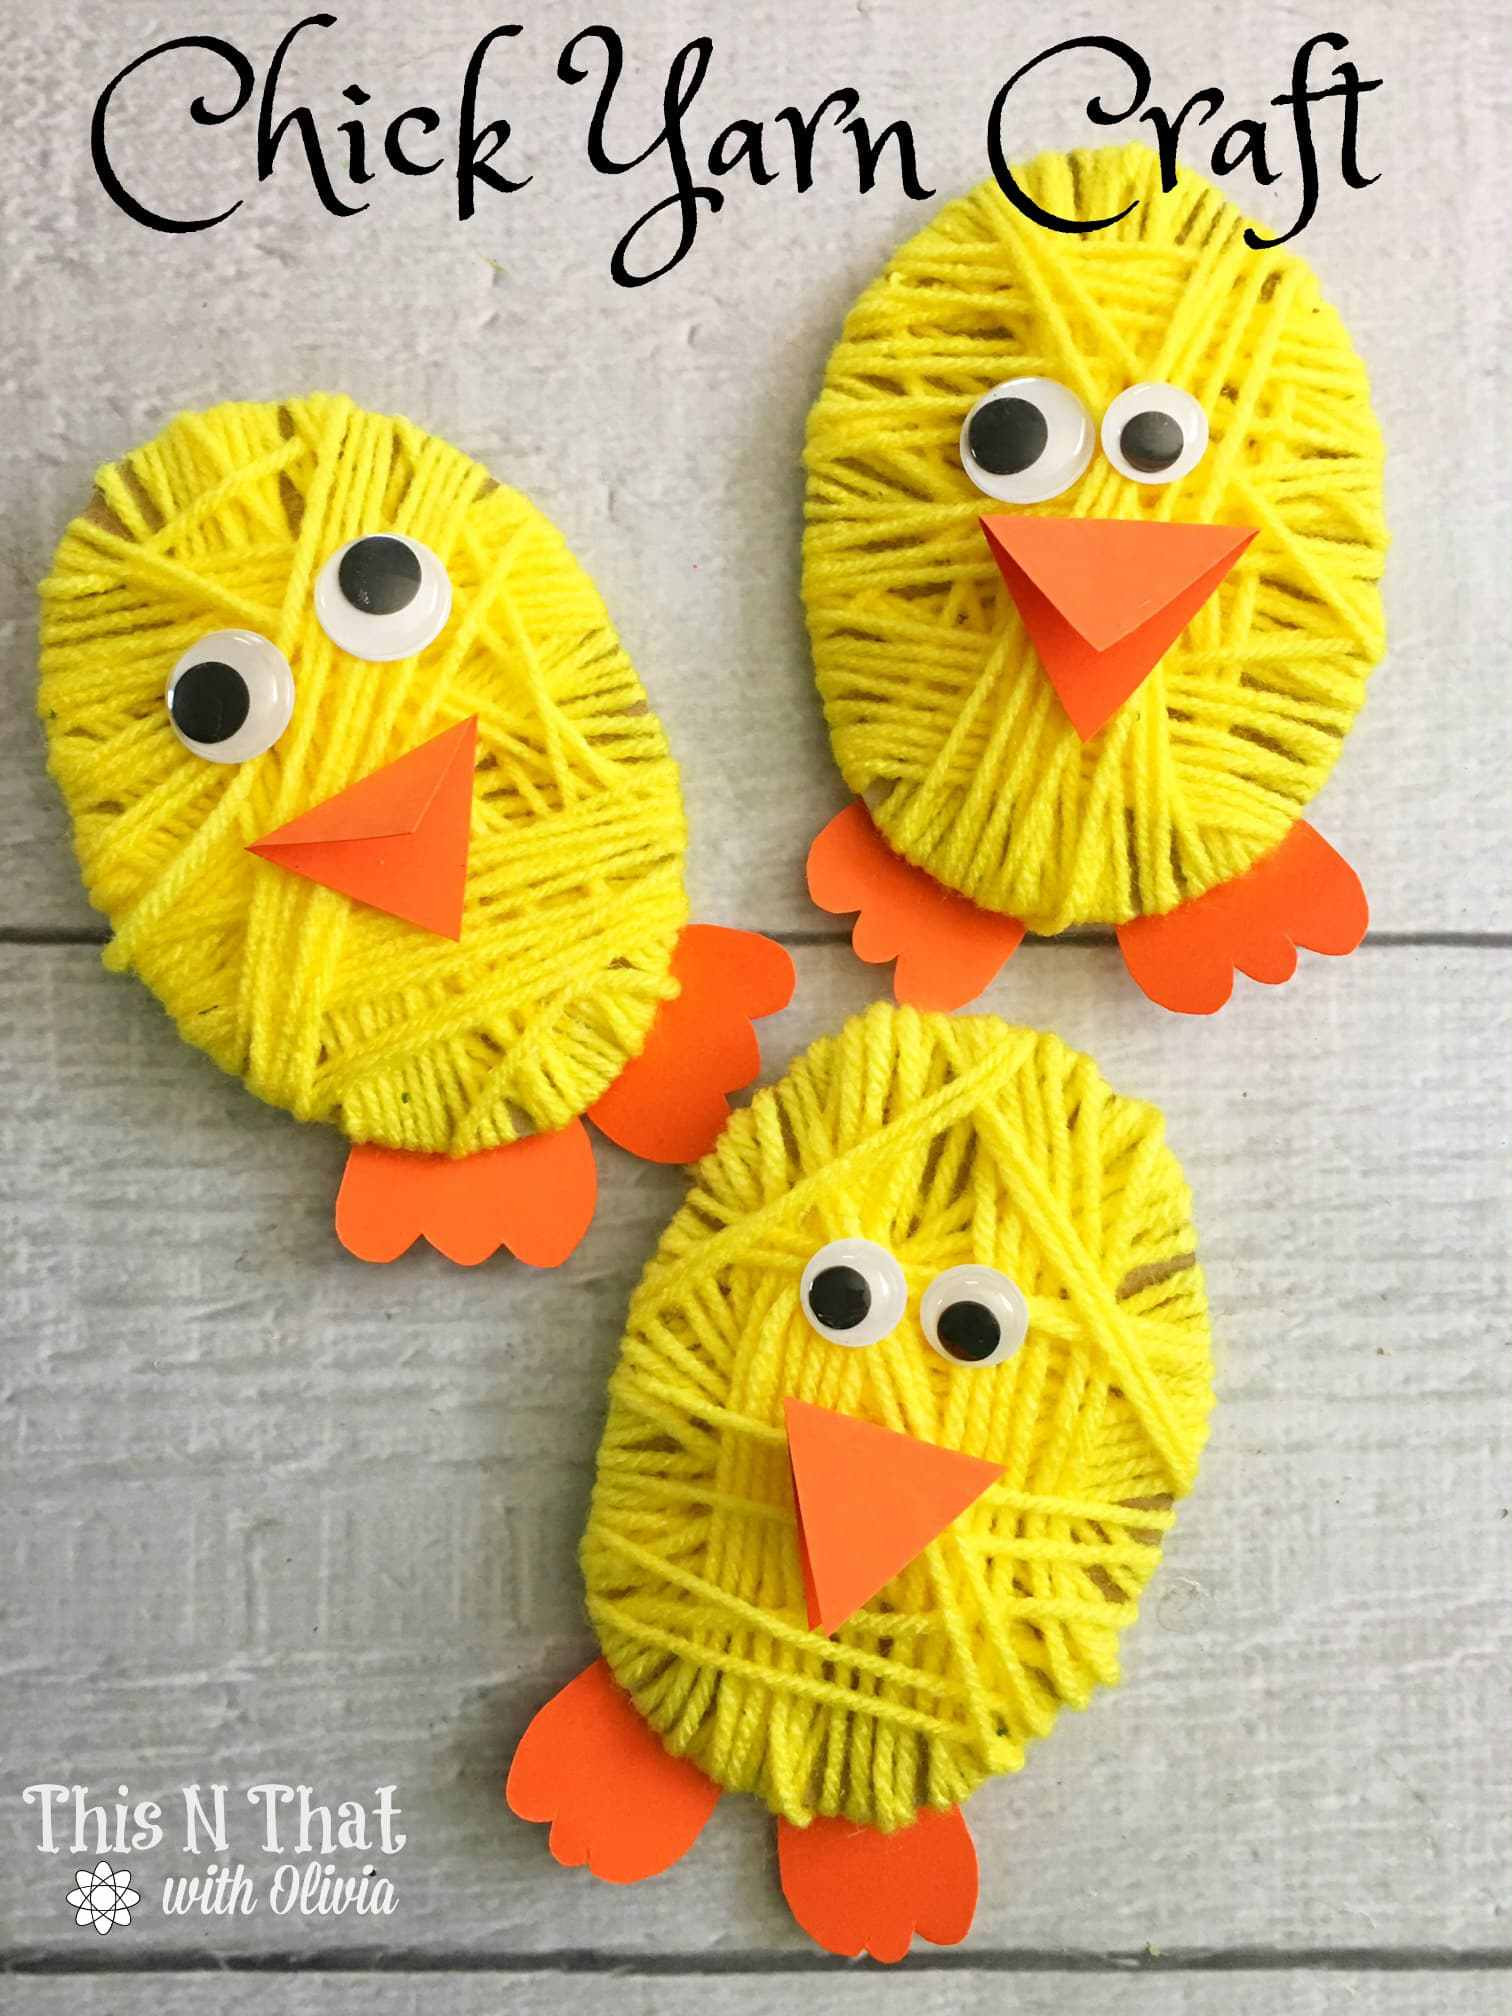 Cute Preschool Crafts
 Over 33 Easter Craft Ideas for Kids to Make Simple Cute